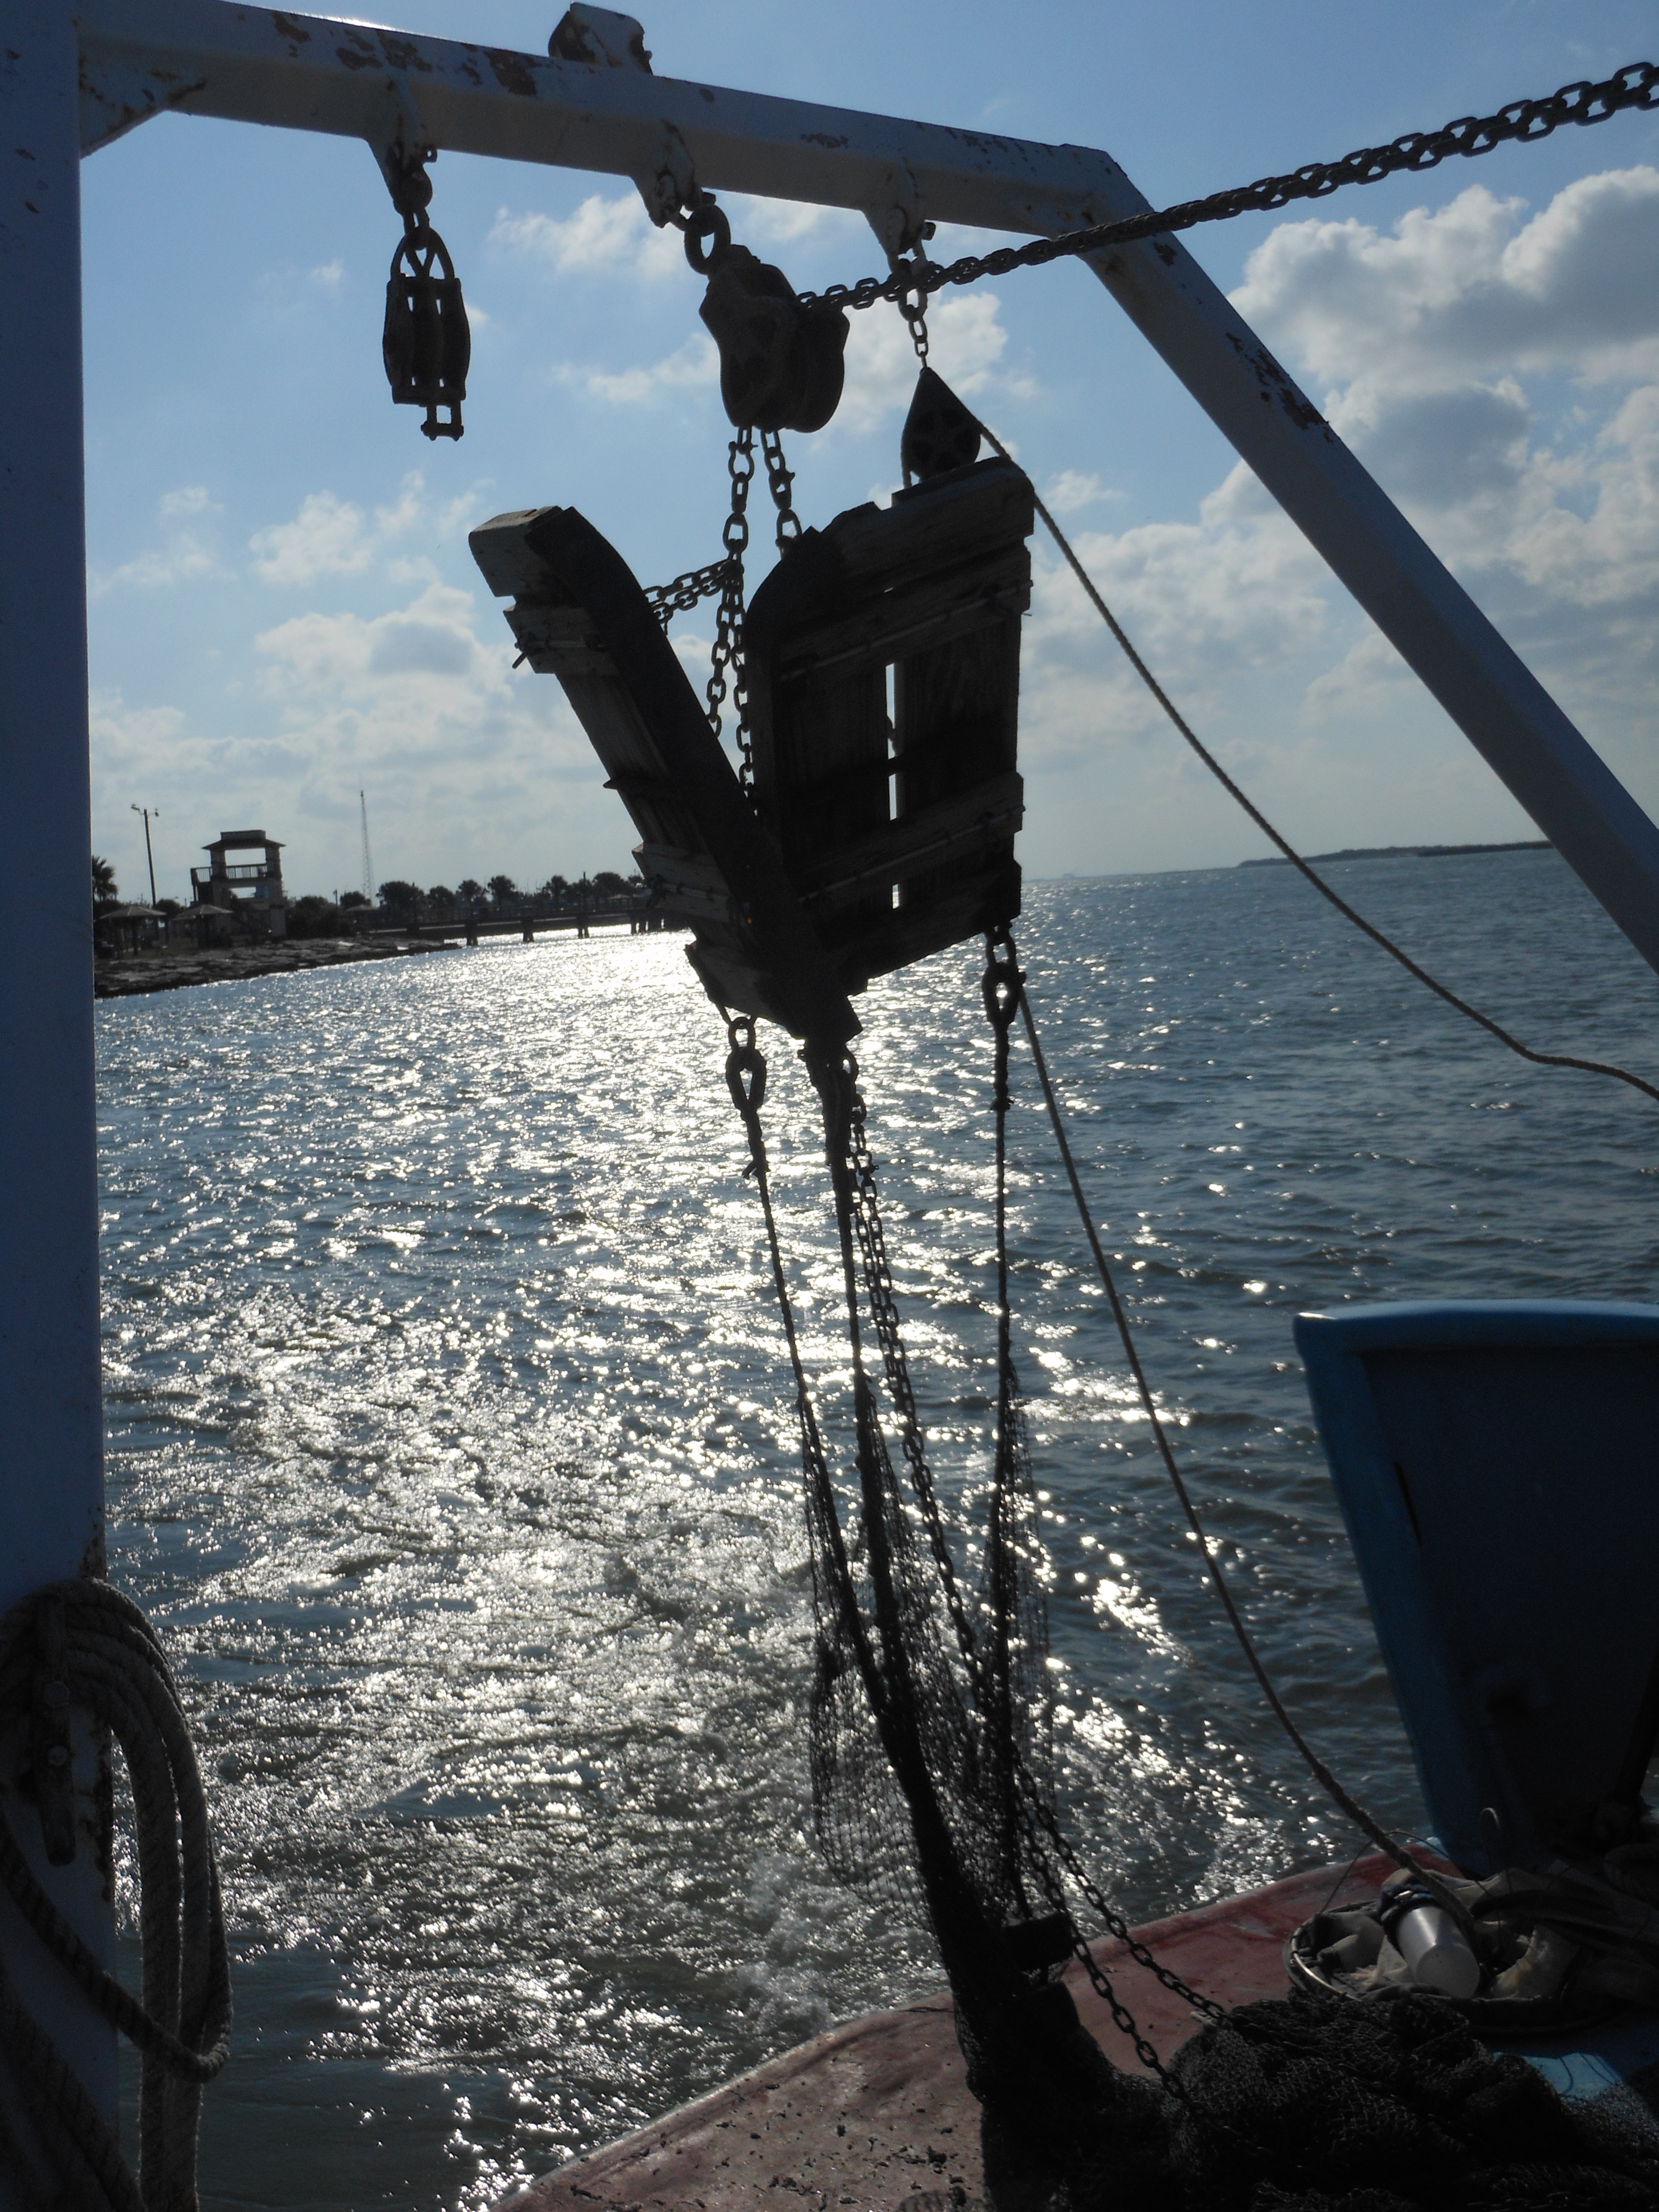 Large Fishing Equipment on a boat with sea view